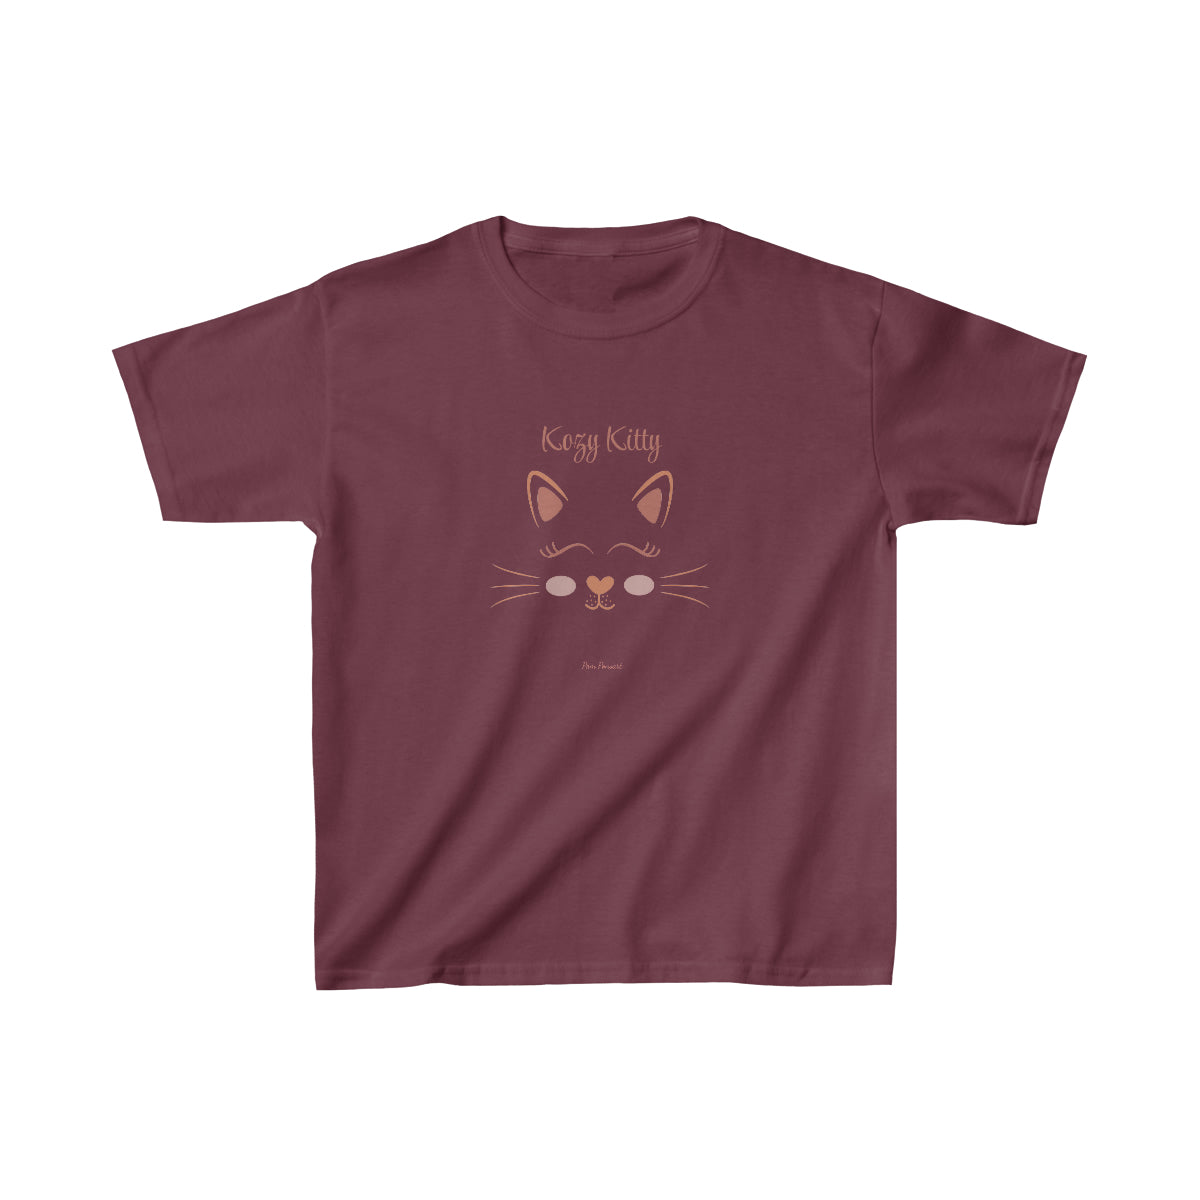 Flat front view of the maroon t-shirt